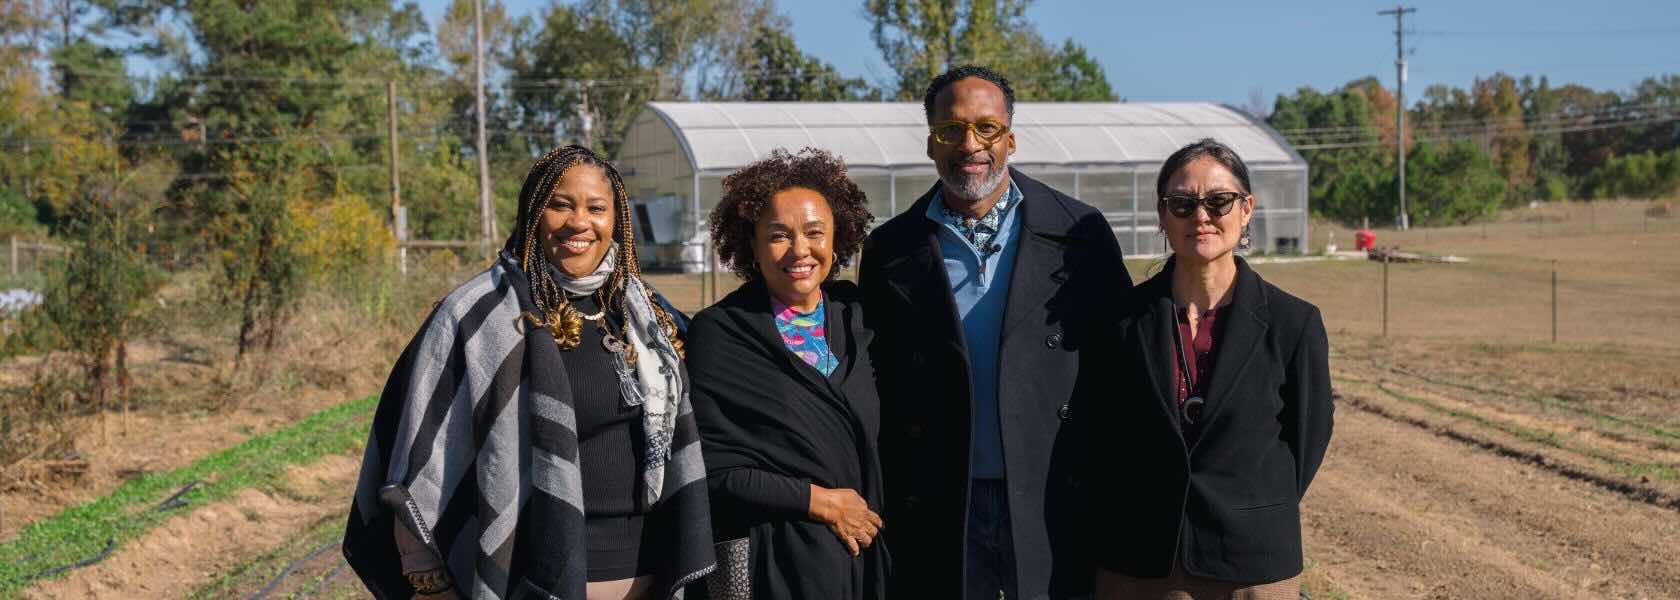 Sipp Culture’s Brandi Turner, NEA Chair Dr. Maria Rosario Jackson, Sipp Culture’s Carlton Turner, NEH Chair Shelly Lowe at the site visit for Sipp Culture